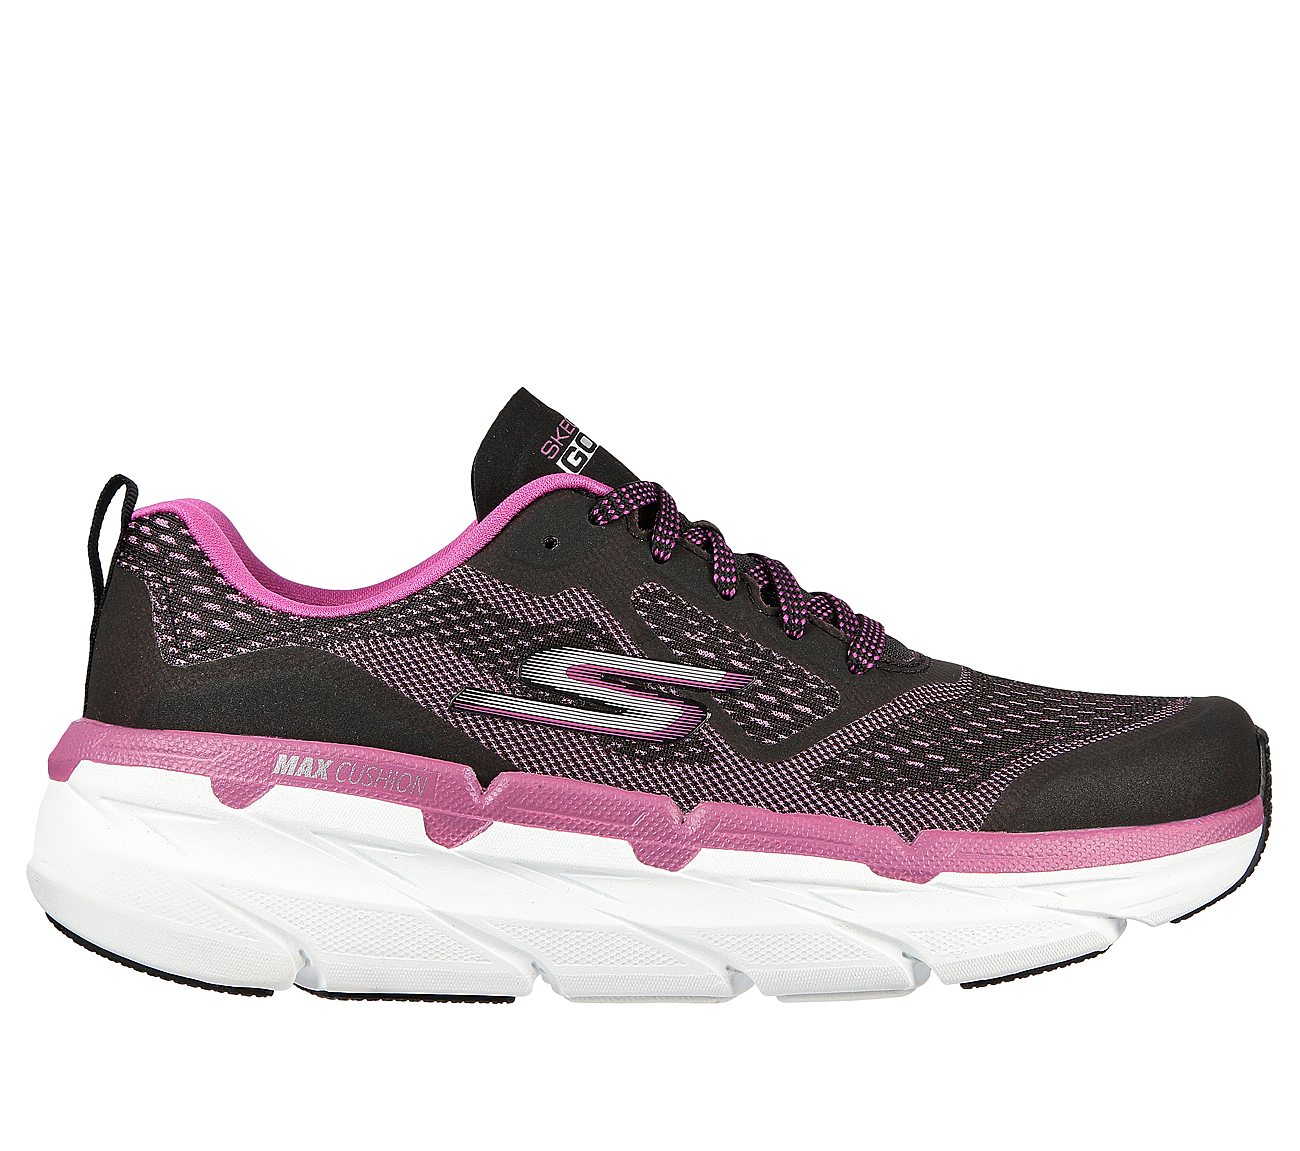 sketcher shoes for ladies